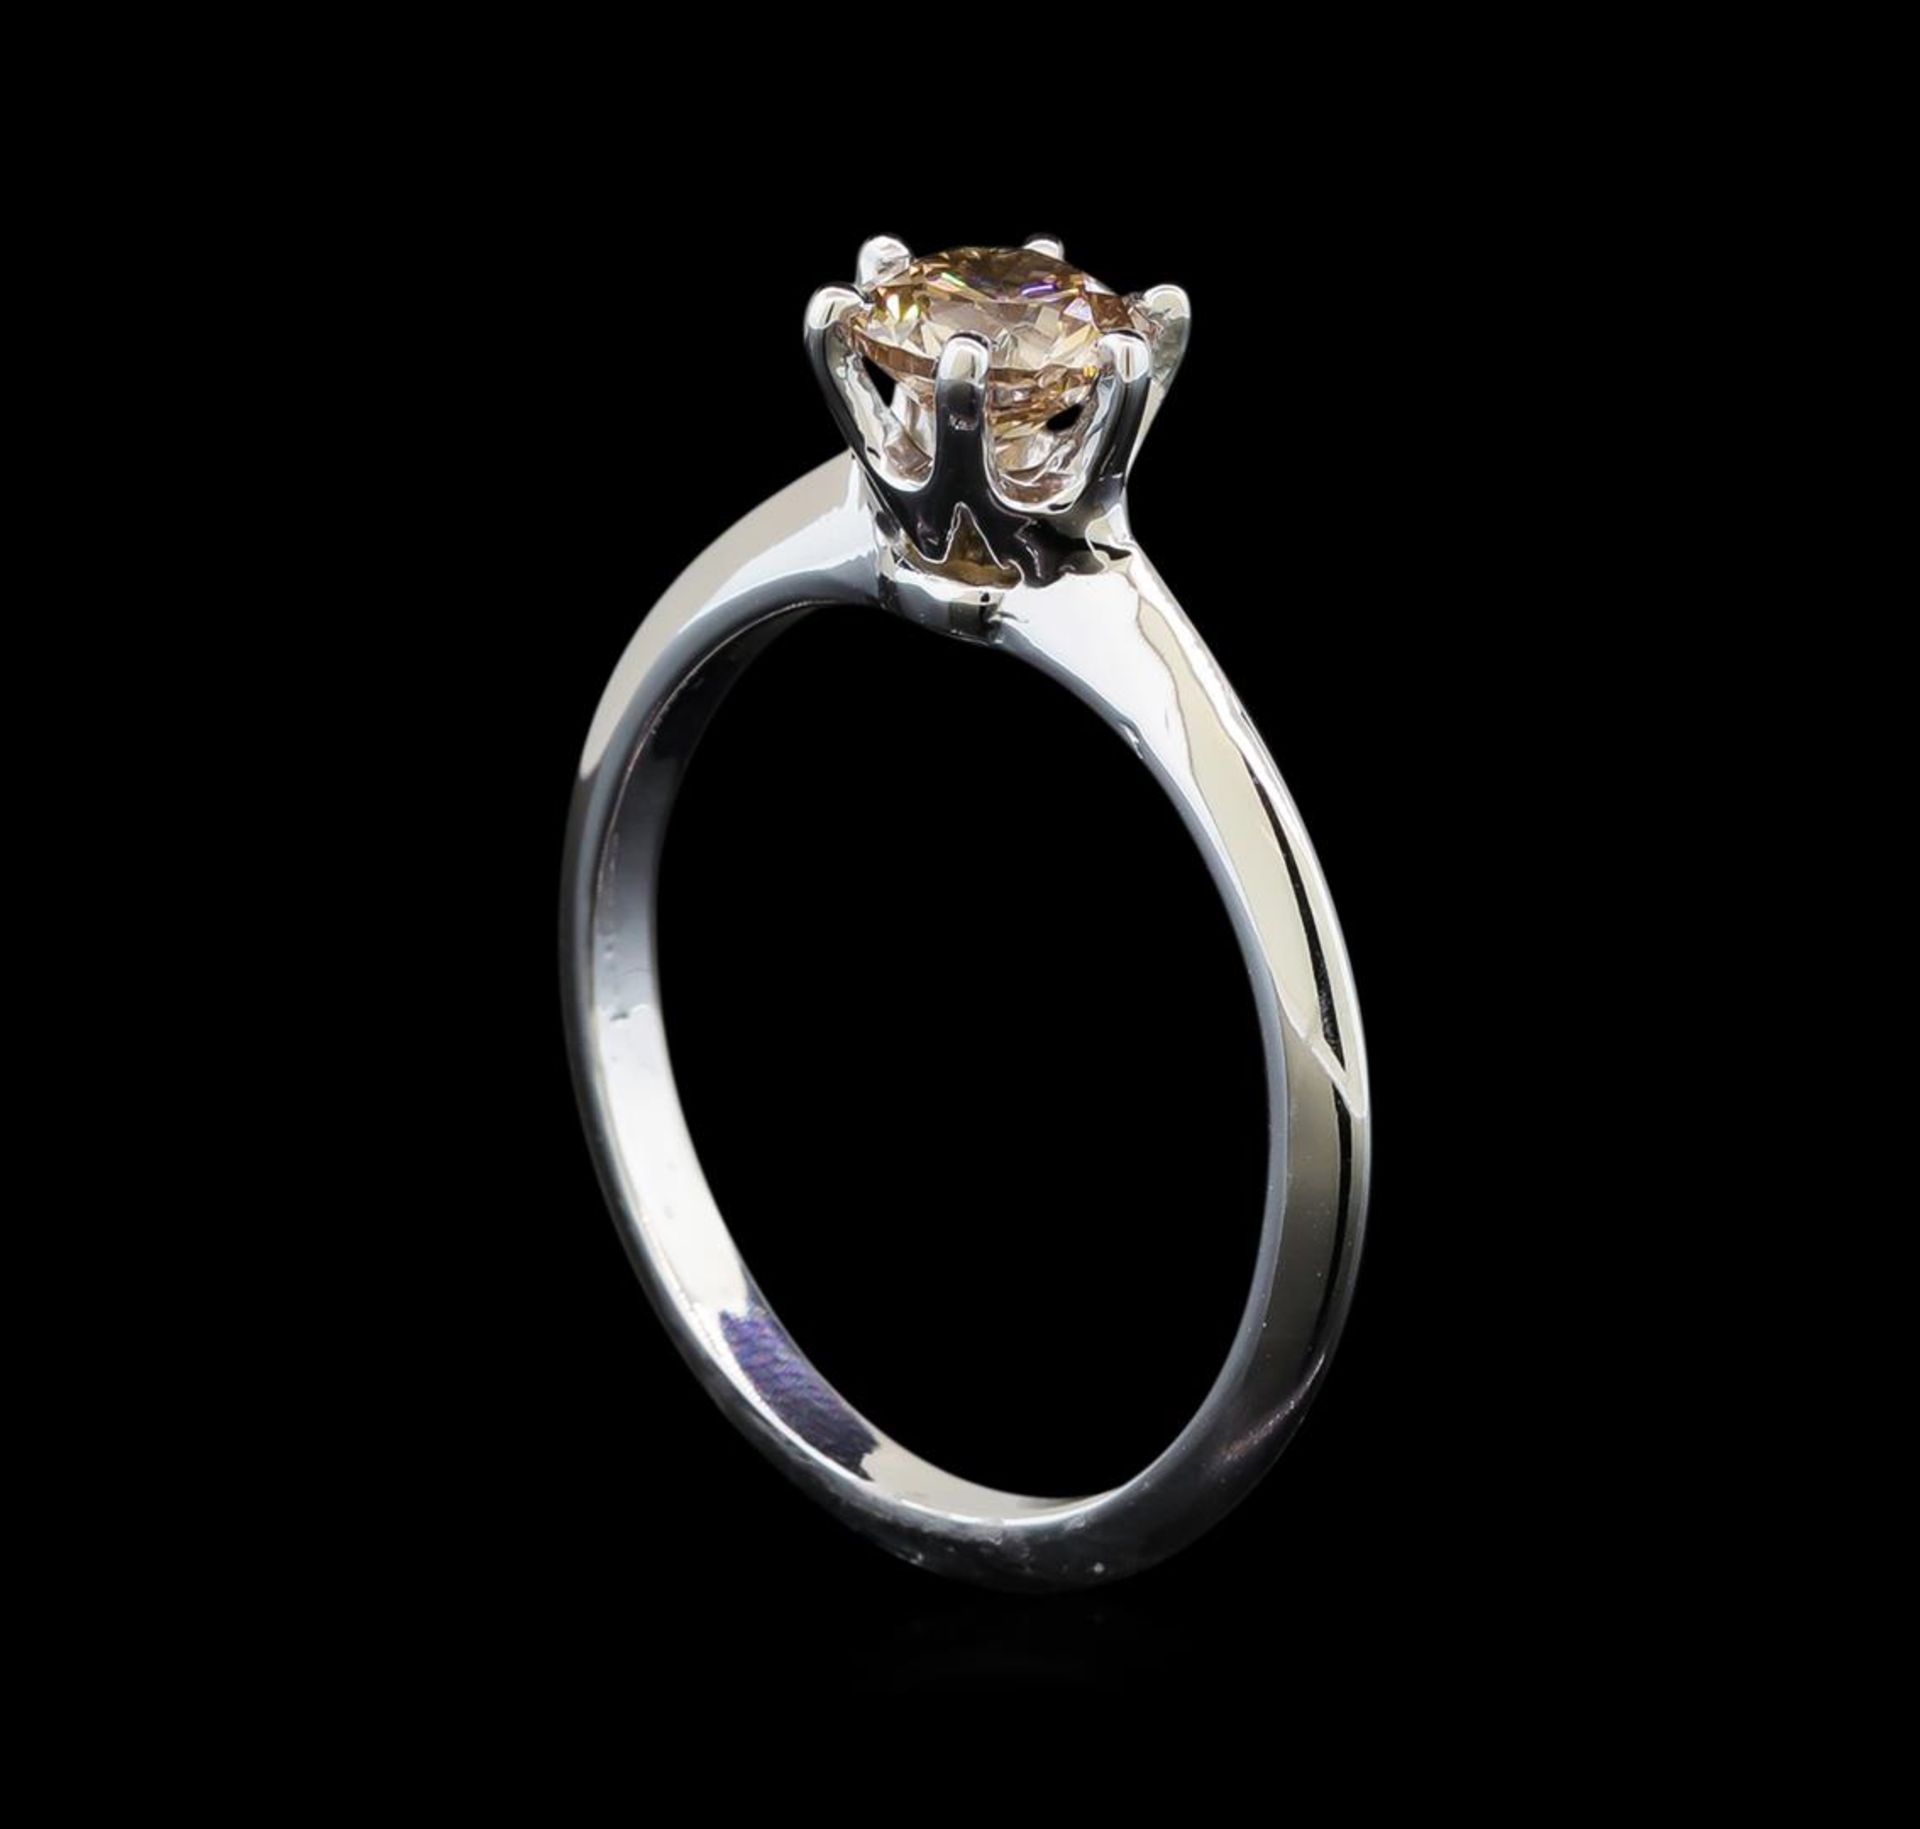 14KT White Gold 0.70 ct Round Cut Fancy Brown Diamond Solitaire Ring - Image 4 of 5